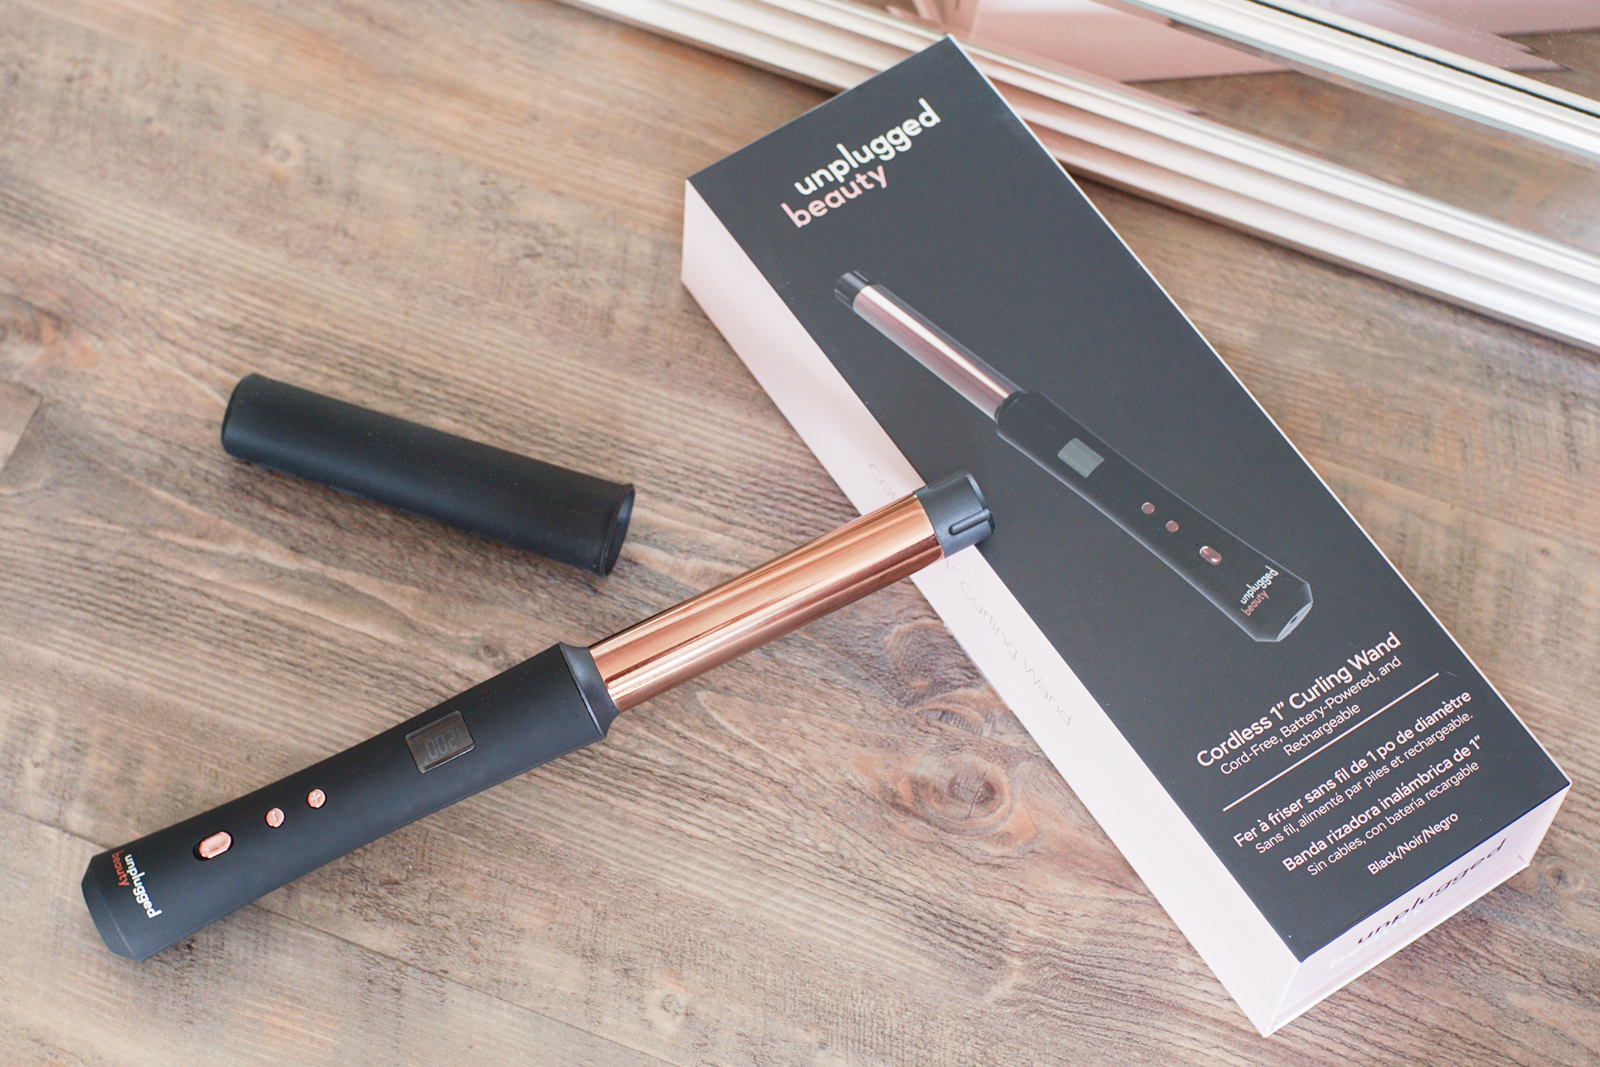 Unplugged Beauty Cordless Curling Wand review-7